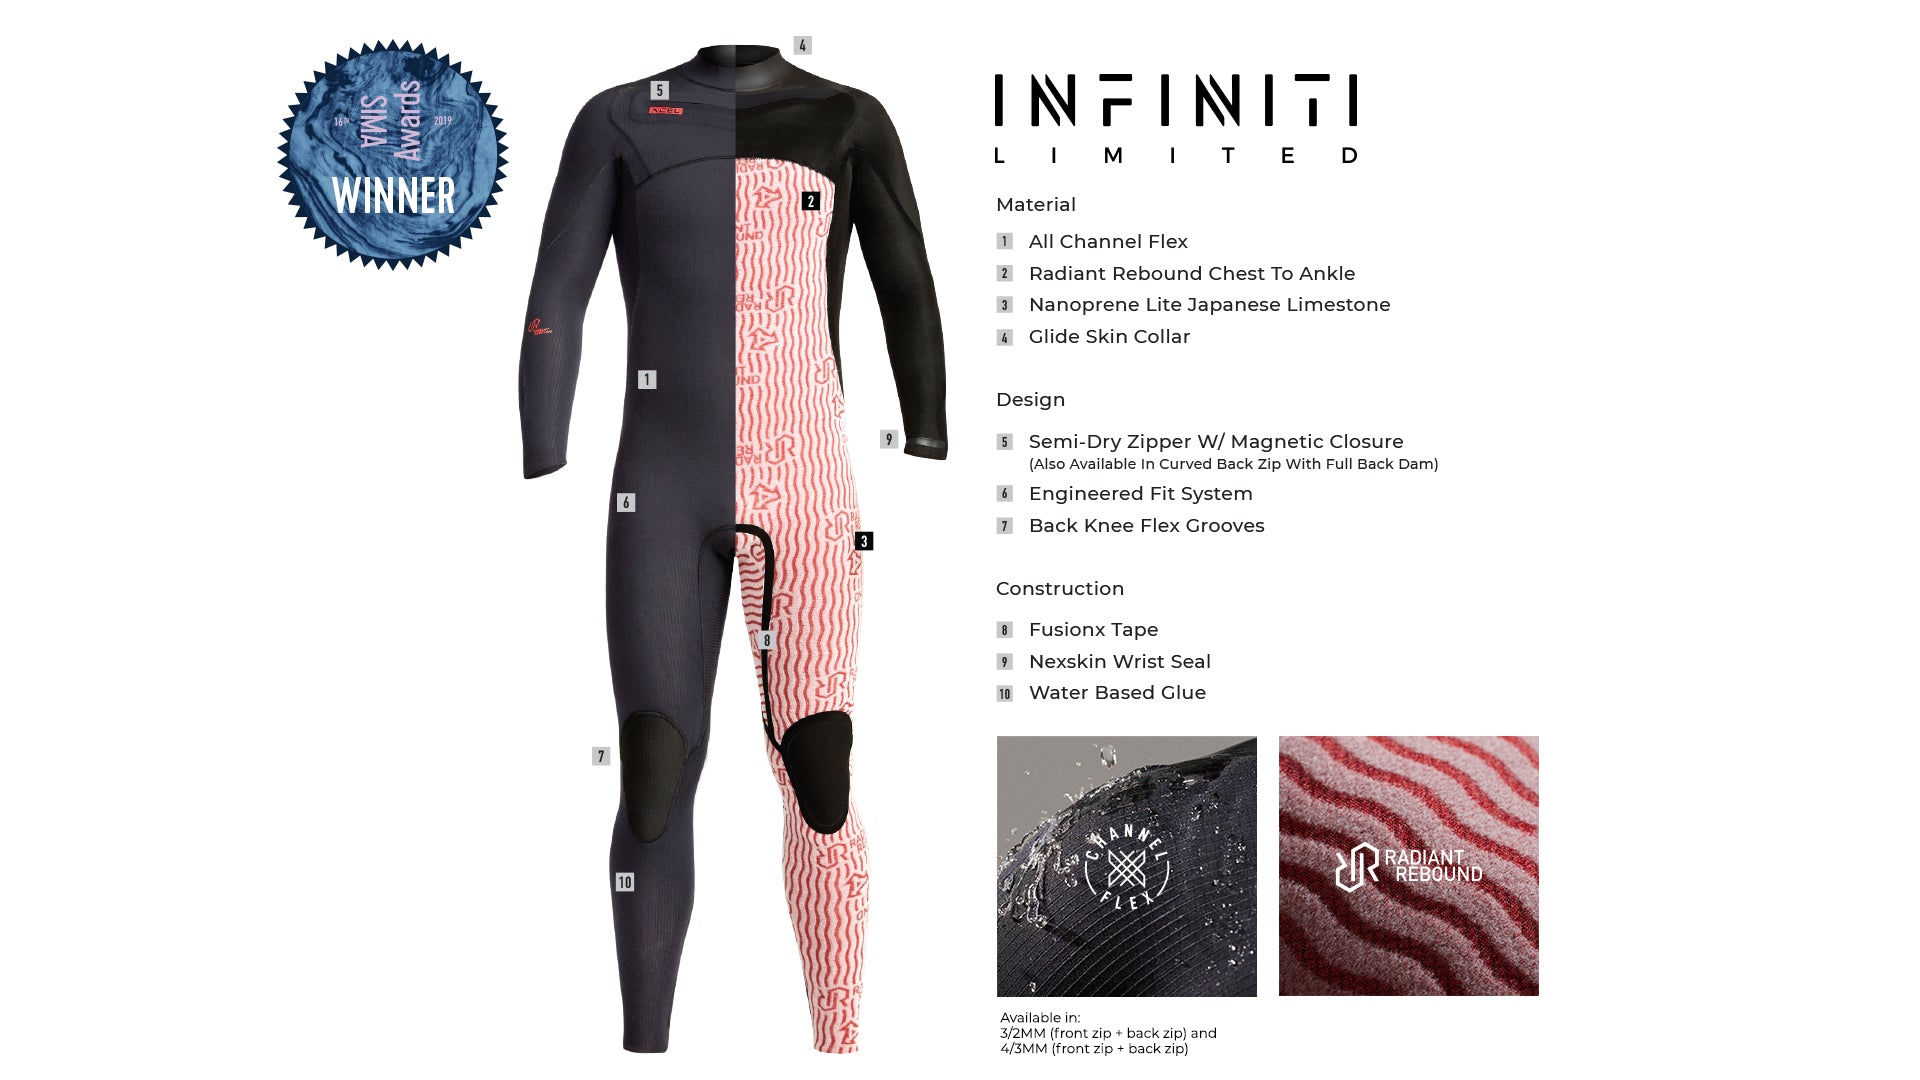 A split suit image of the surf shop exclusive Infiniti LTD showing both the exterior and interior of the suit